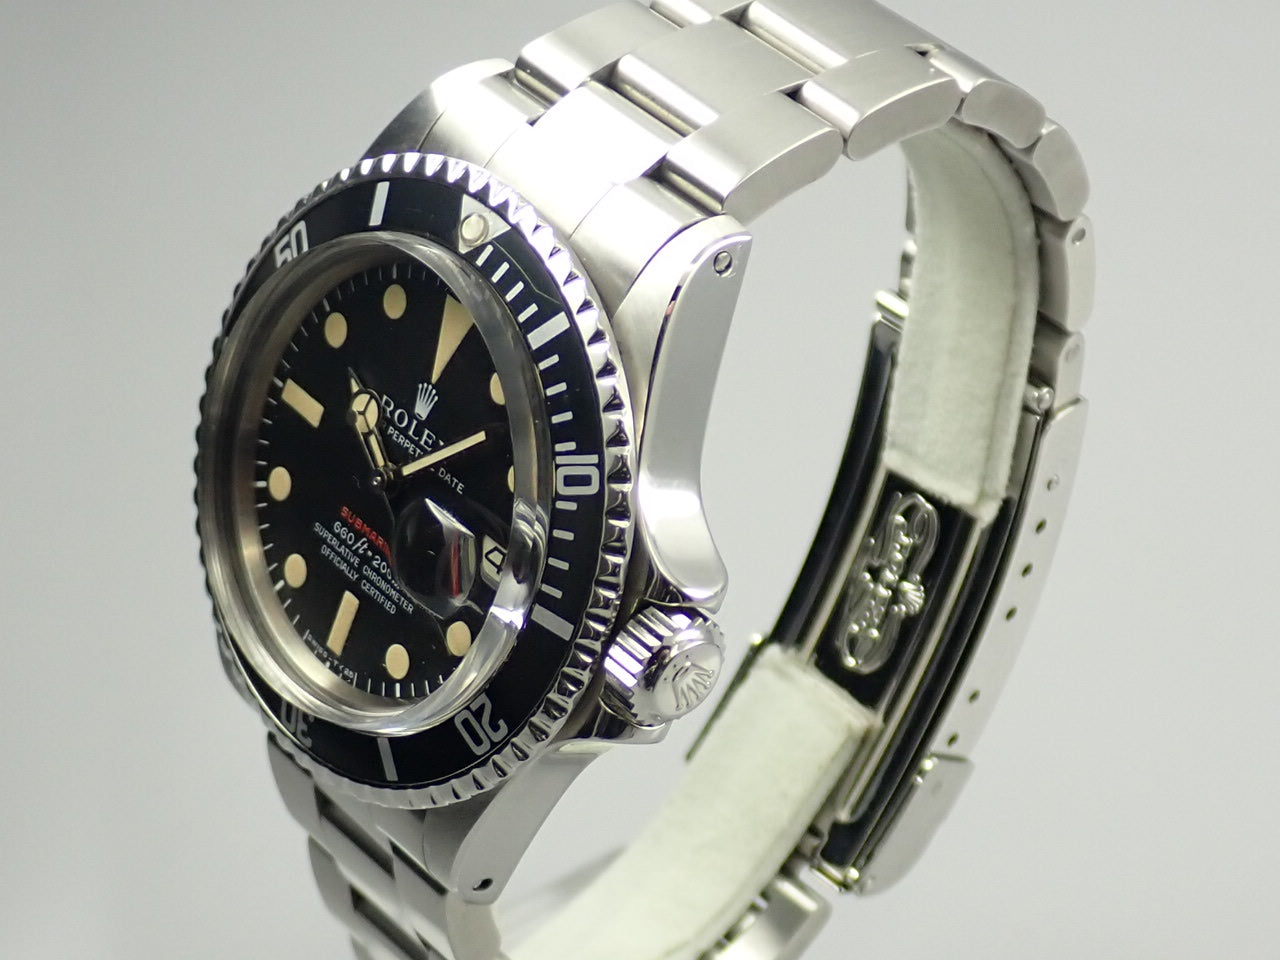 Rolex Red Submariner &lt;Warranty Box and Others&gt;